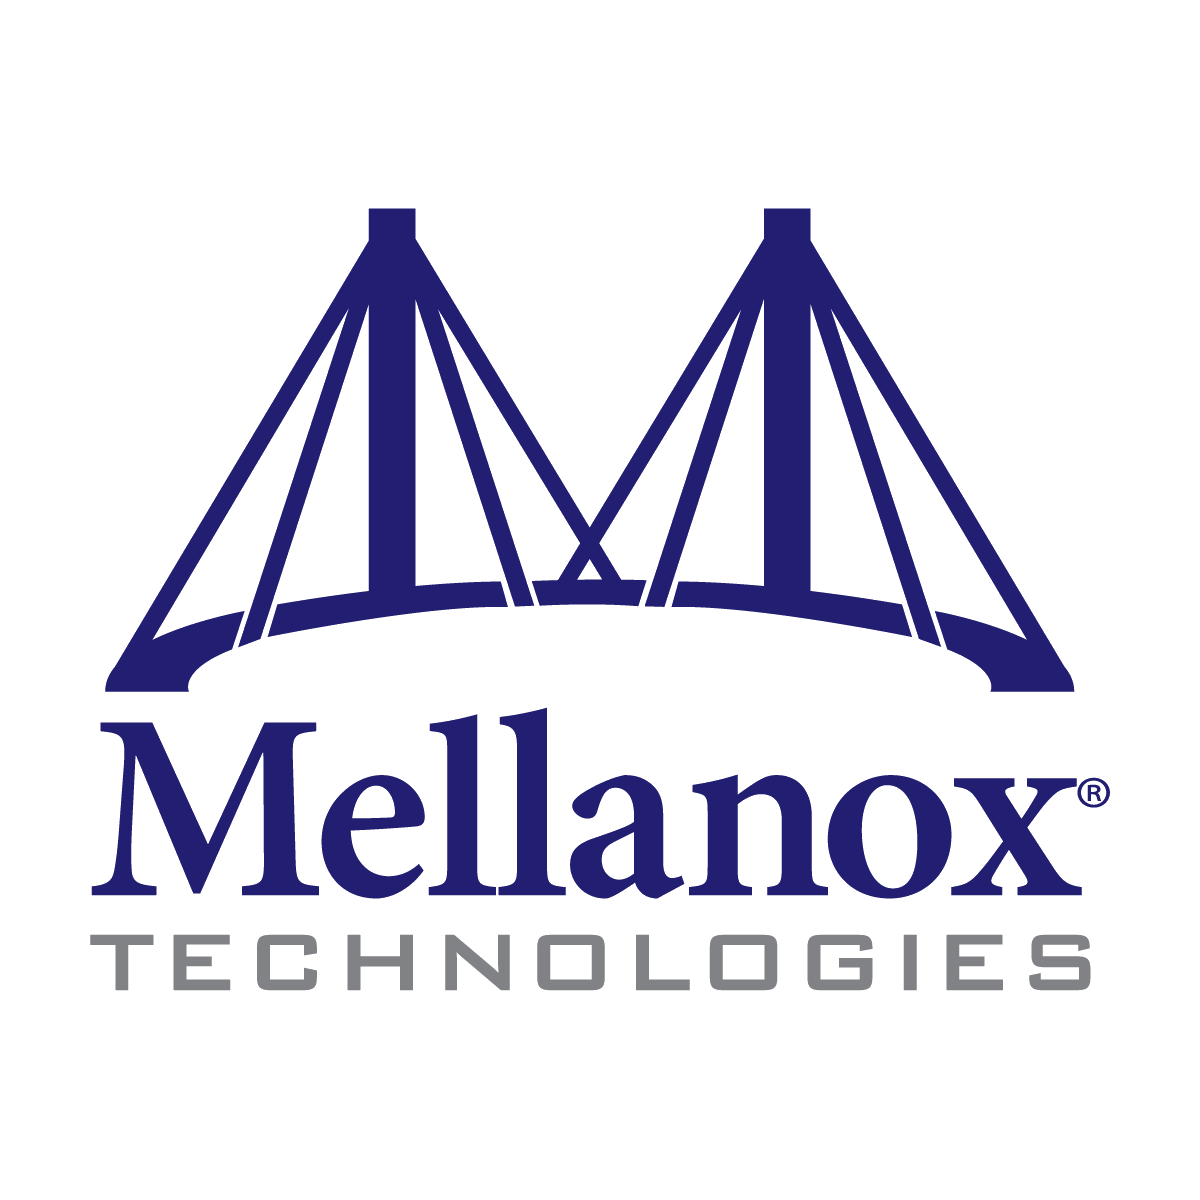 Mellanox Spectrum(R) Based 100GbE 1U Open Ethernet Switch With Onyx, 16 QSFP28 Ports, 2 Power Supplies (Ac), X86 Cpu, Short Depth, P2C Airflow, Rail Kit Must Be Purchased Separately